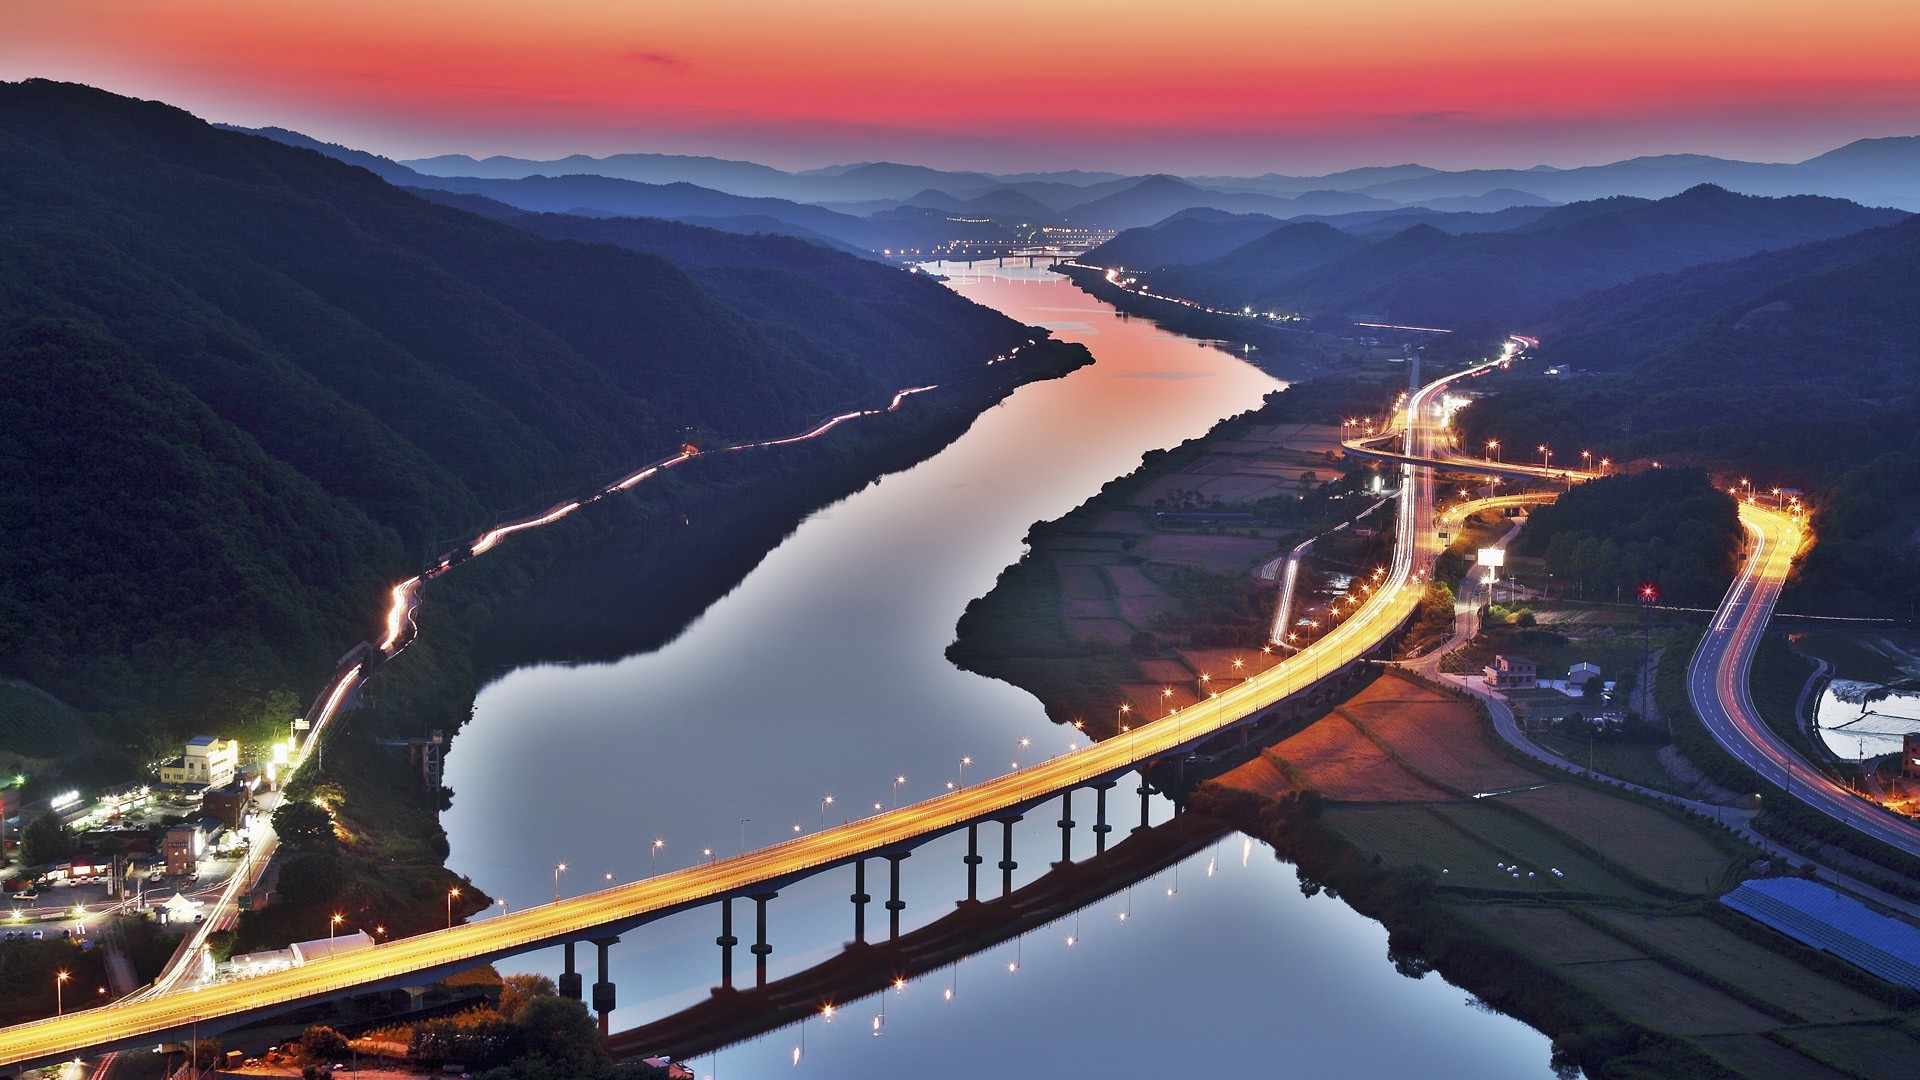 South Korea, River, Road, Bridge, Lights, Mountains, Sunset, Aerial view, Photography, City Wallpaper